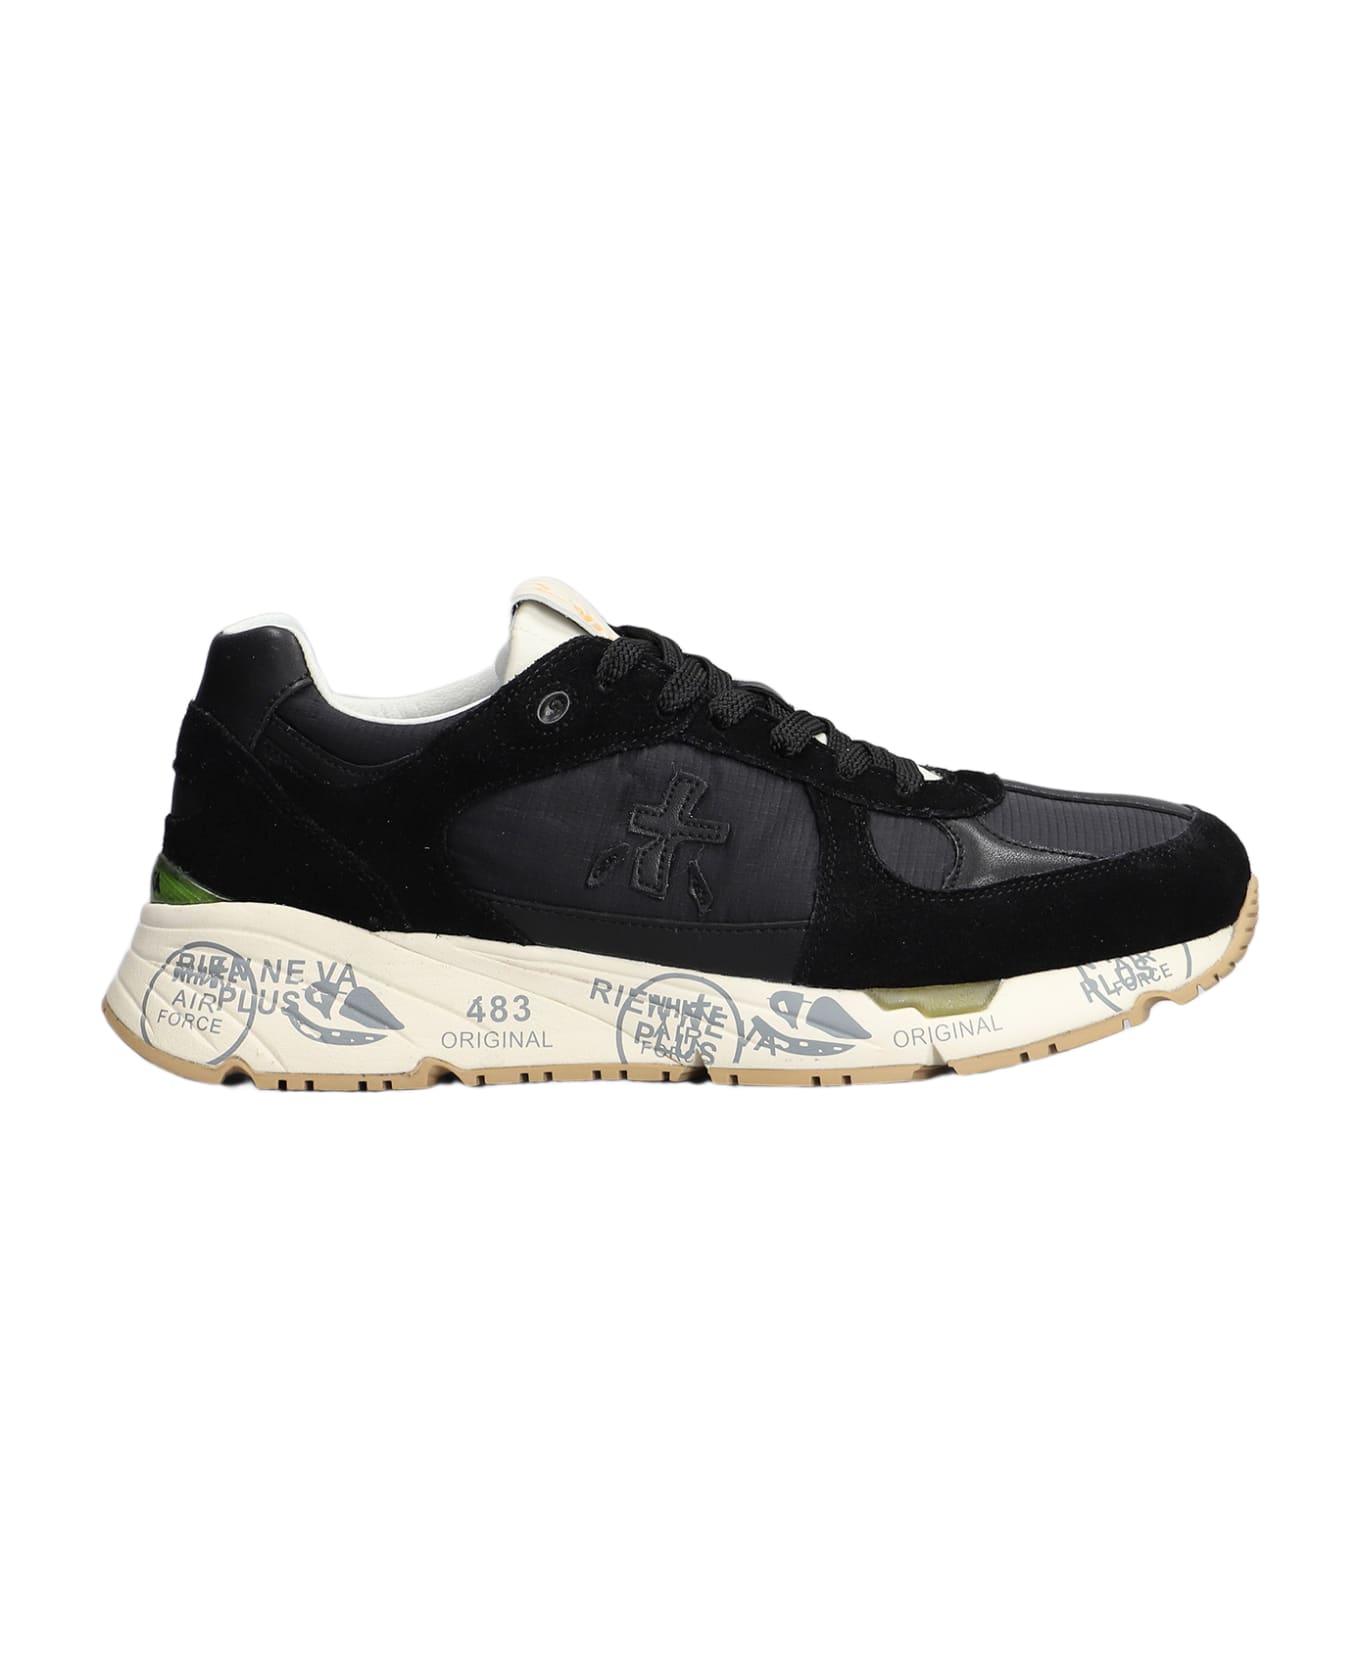 Premiata Mase Sneakers In Black Suede And Fabric - Black スニーカー